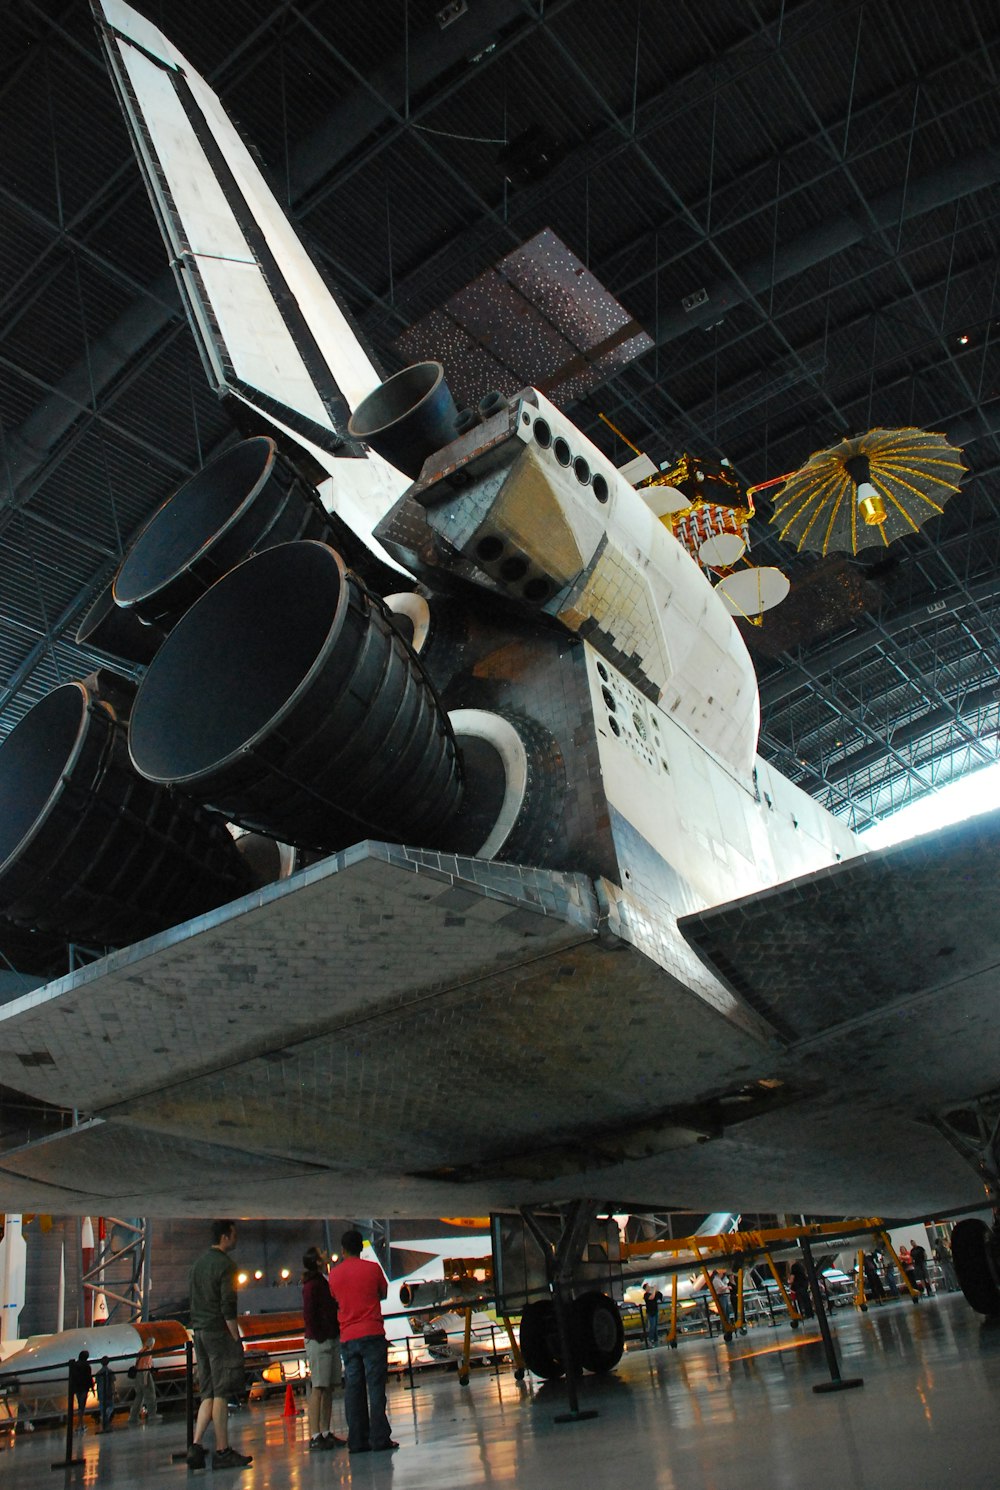 a space shuttle on display in a museum